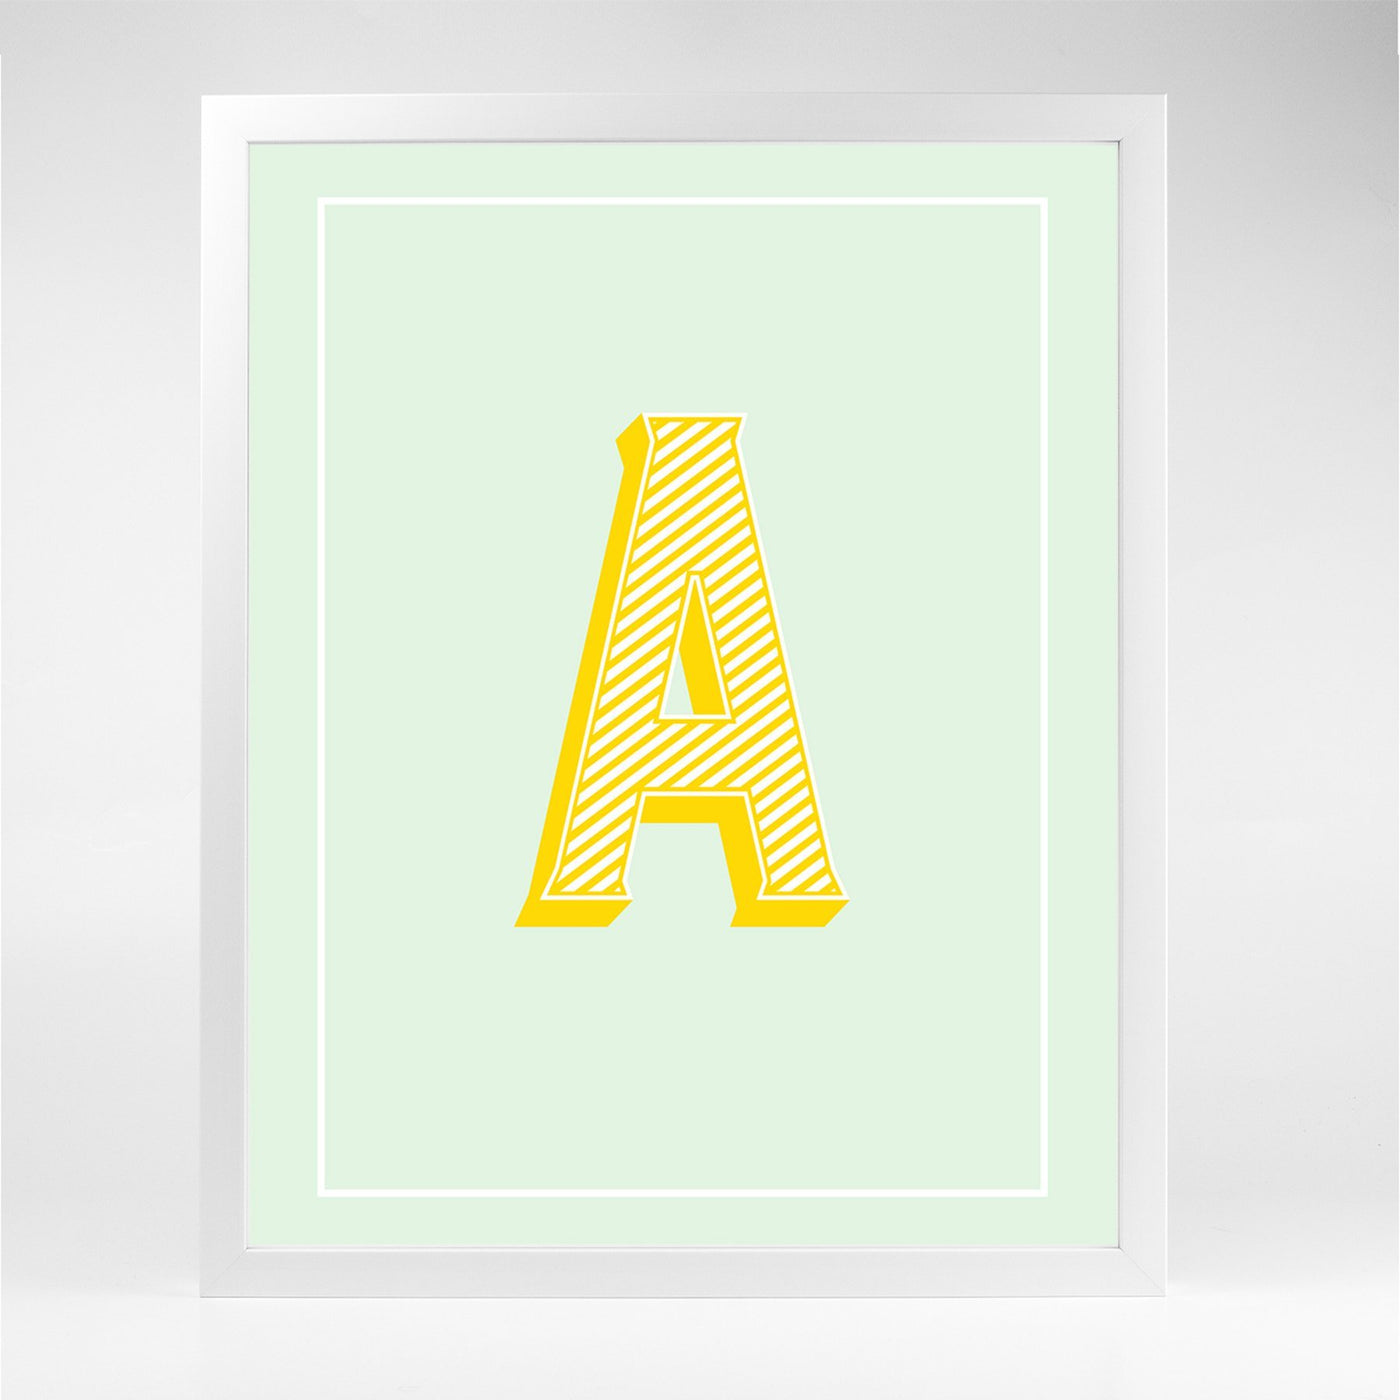 Gallery Prints The Letter Series Katie Kime